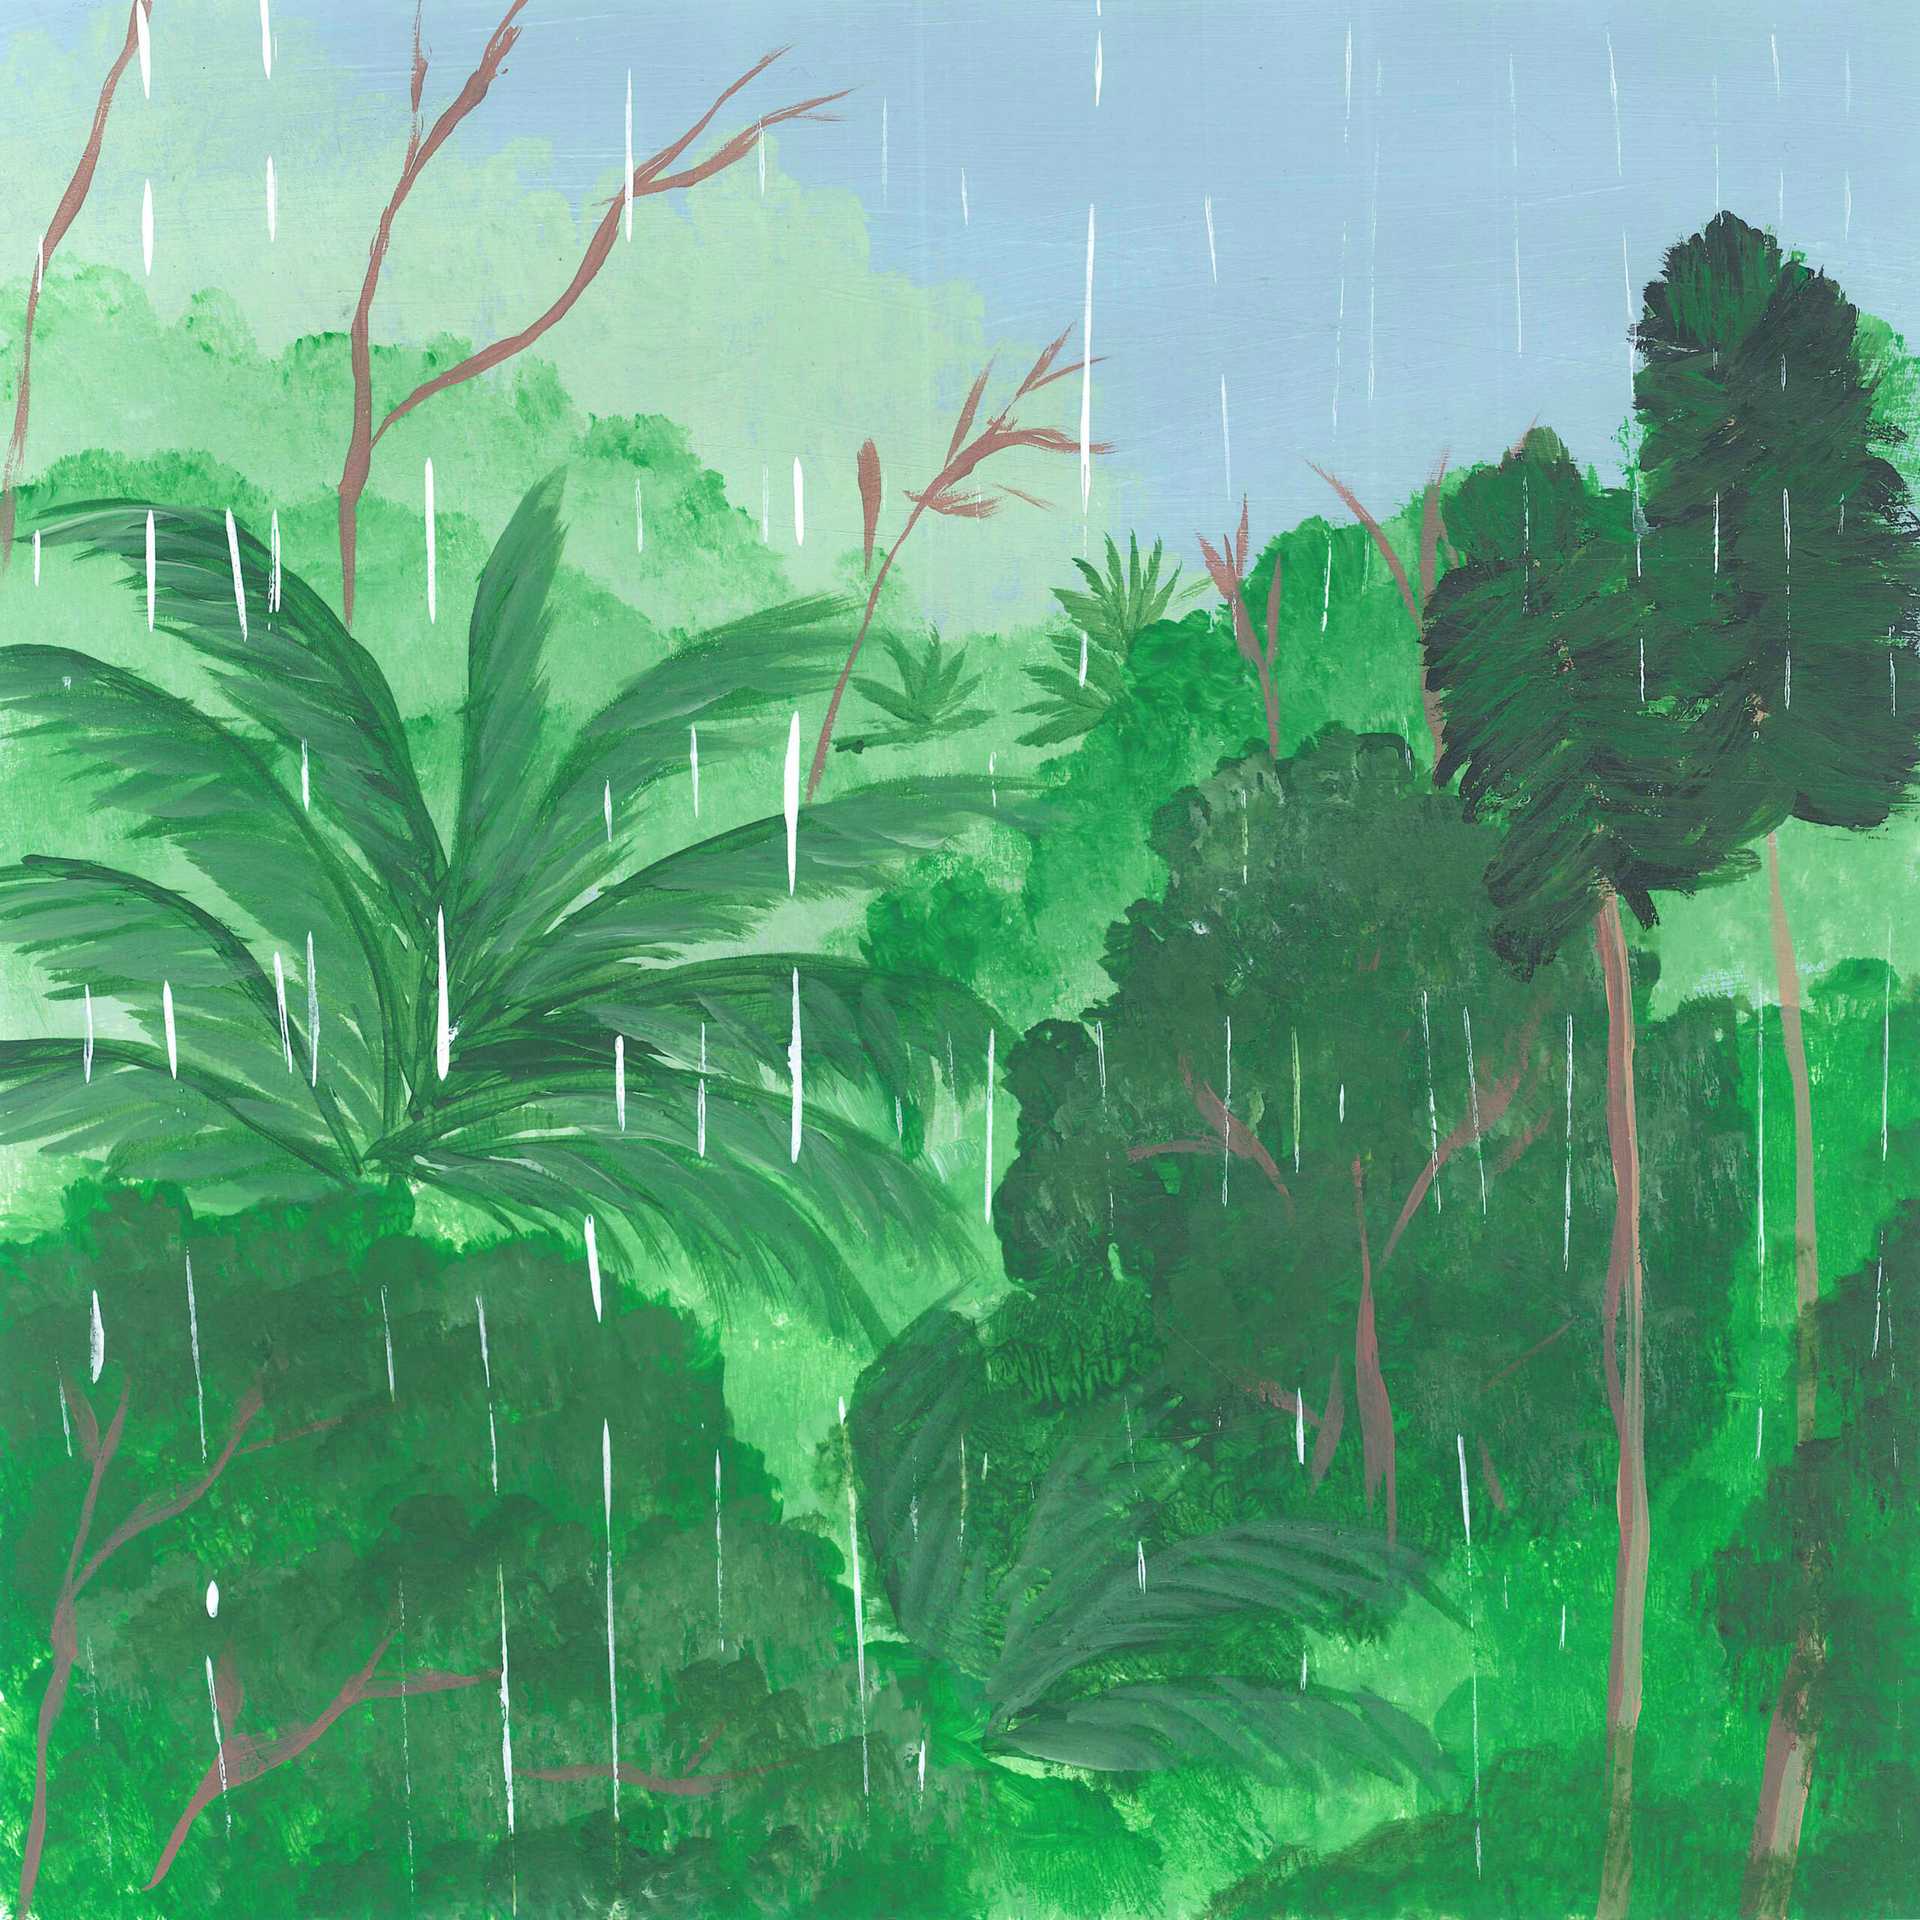 Cold Rain in Madagascar’s Cloud Forest - nature landscape painting - earth.fm